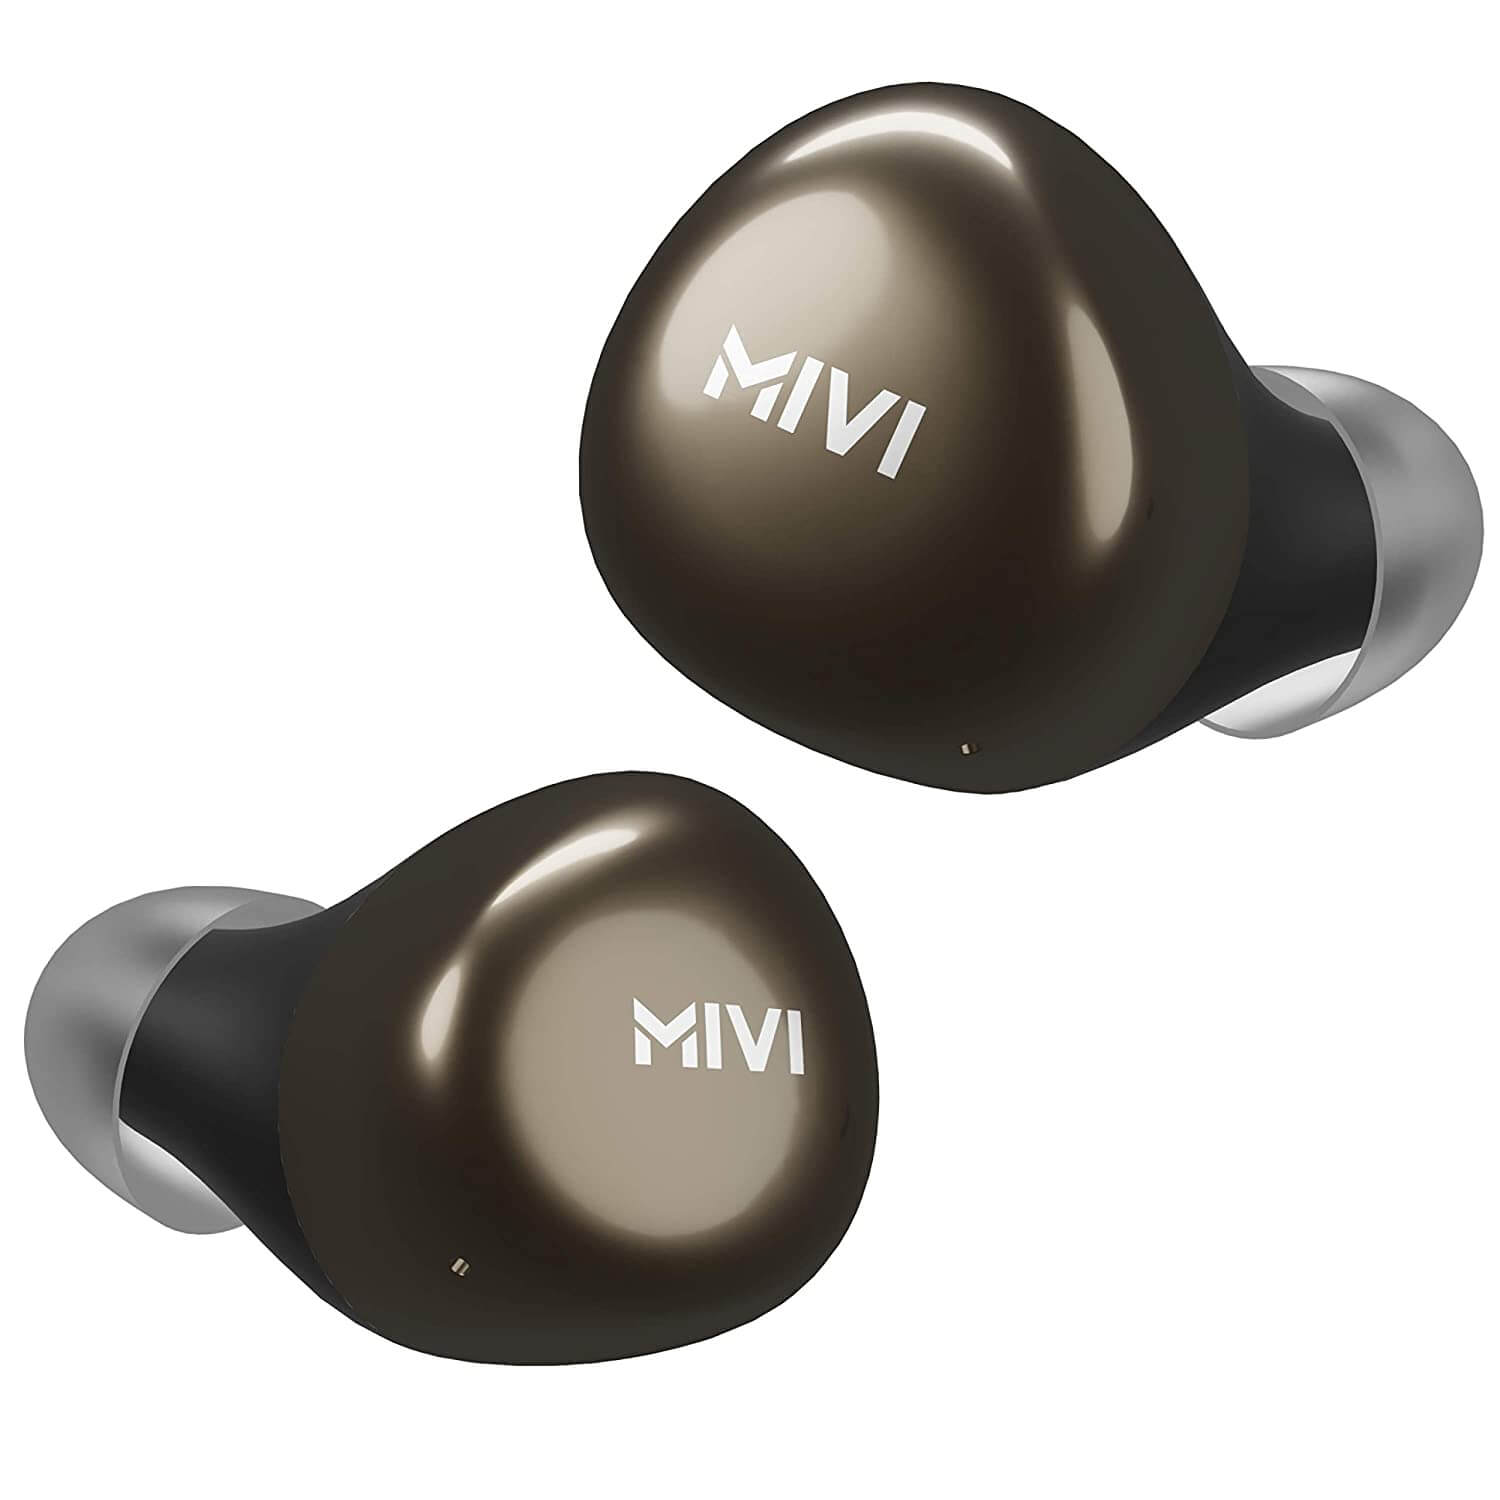 Mivi Duopods M40 True Wireless BluetoothIn Ear Earbuds with Mic, Studio Sound, Powerful Bass, 24 Hours of Battery and EarPods with Touch Control